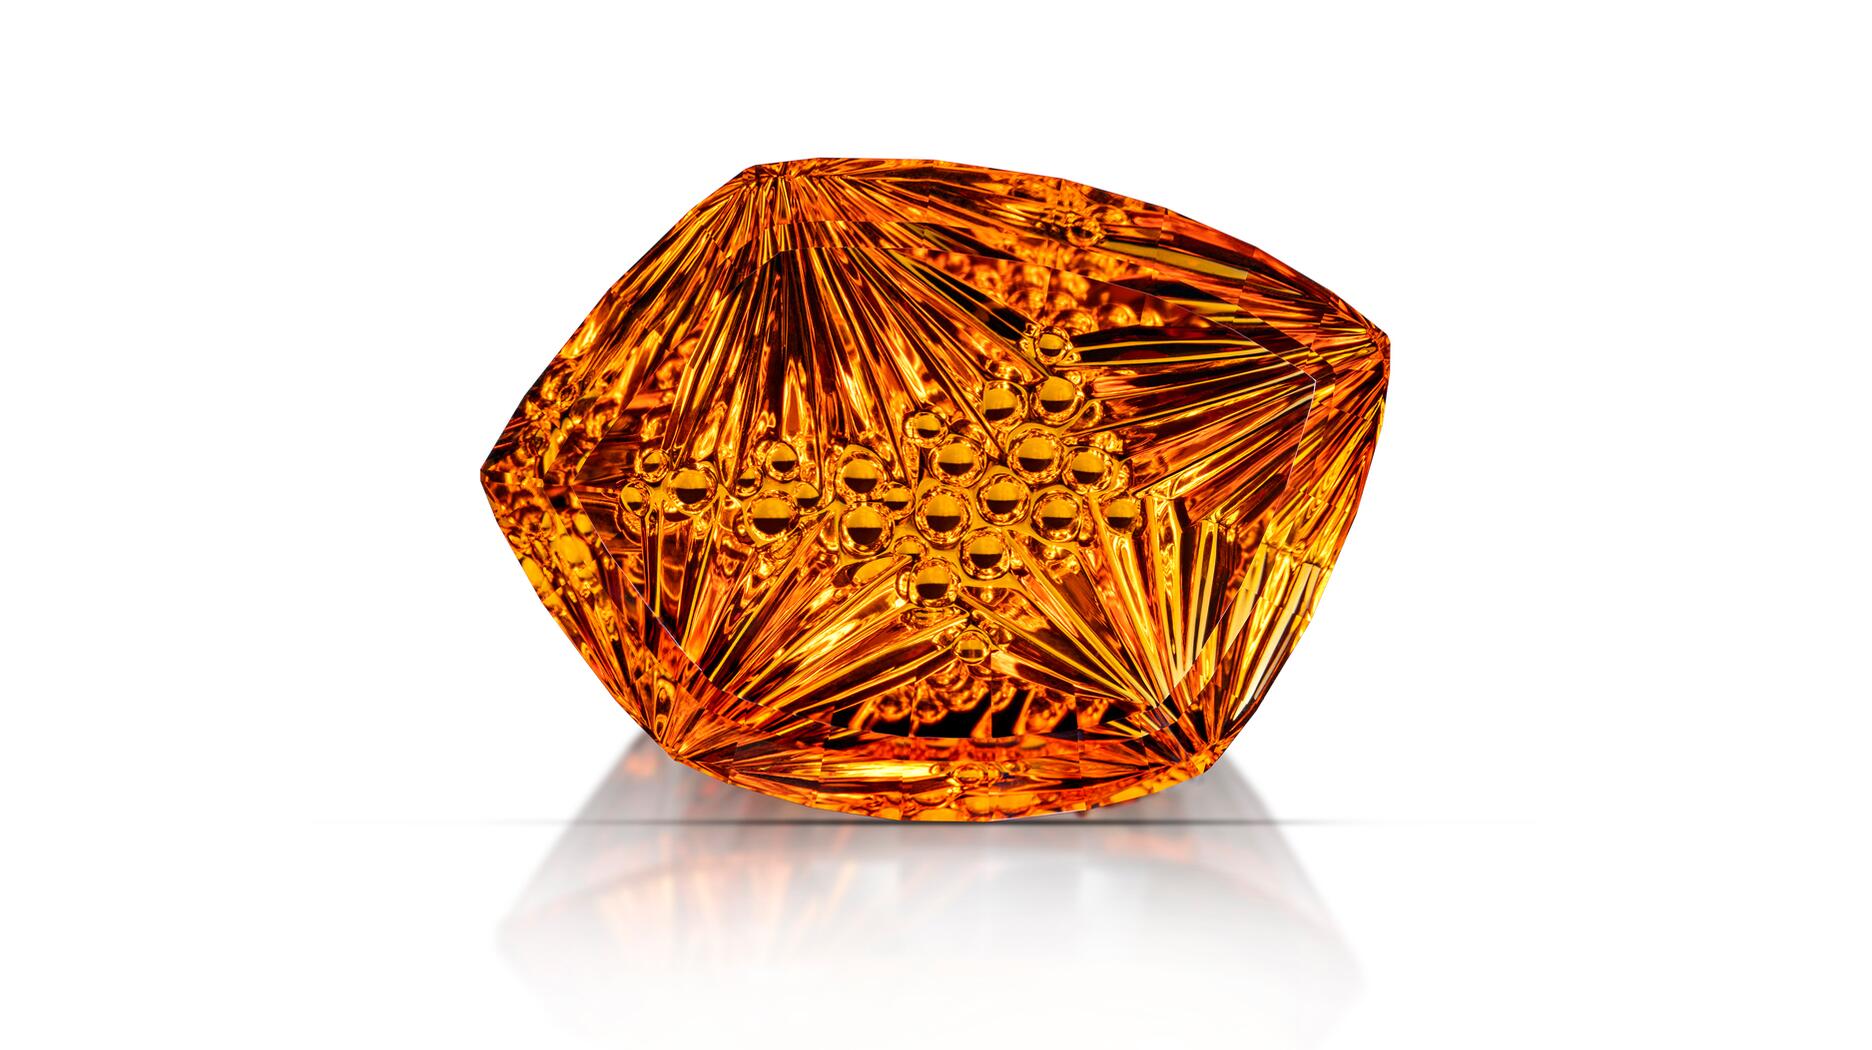 Crescendo, a 147.96-carat golden citrine by John Dyer for Somewhere In The Rainbow